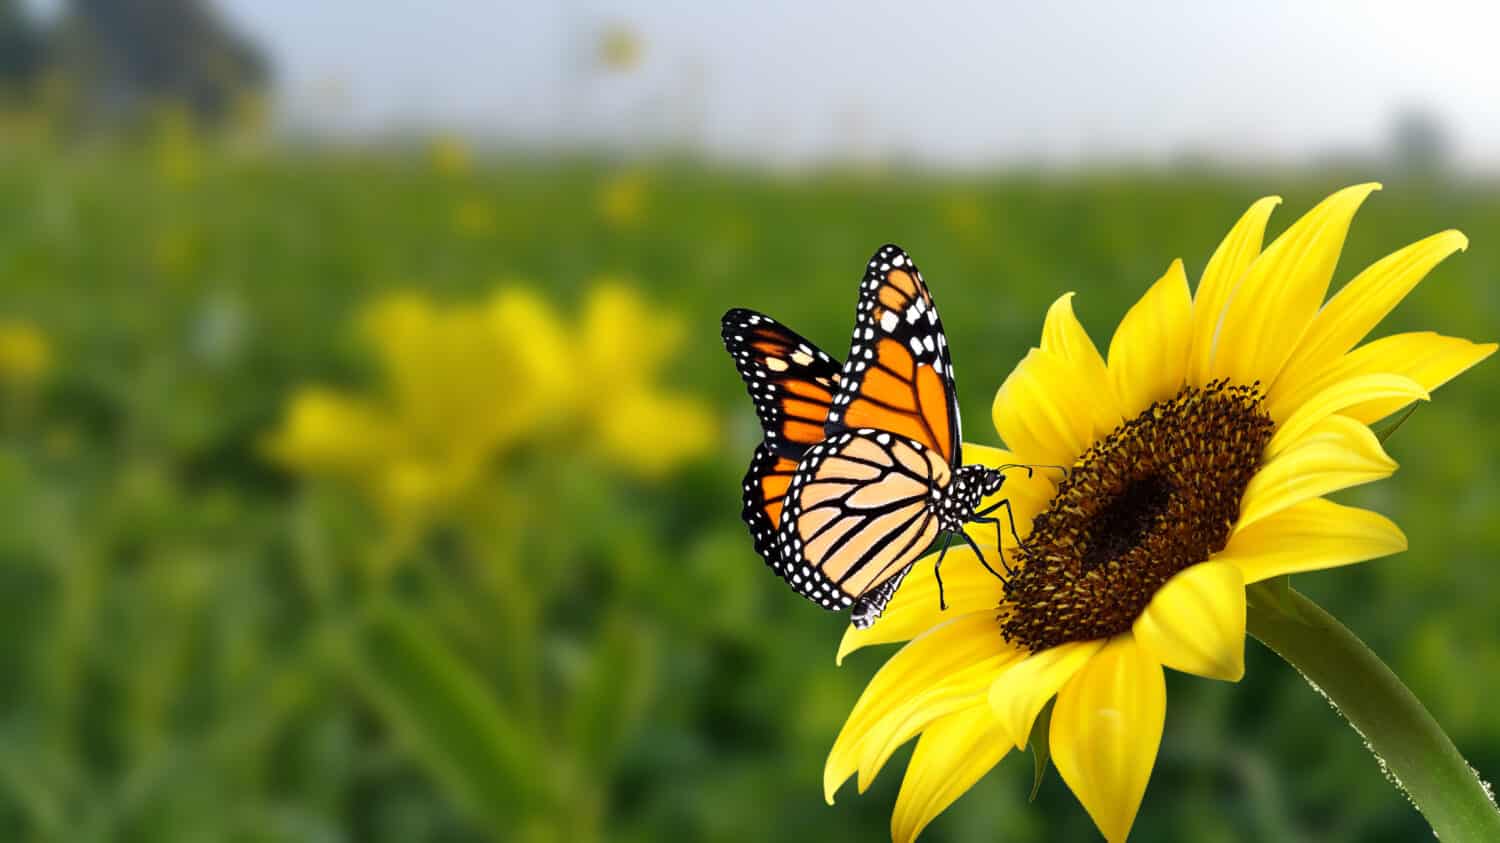 Harmless wild animal in Canada: Monarch butterfly o